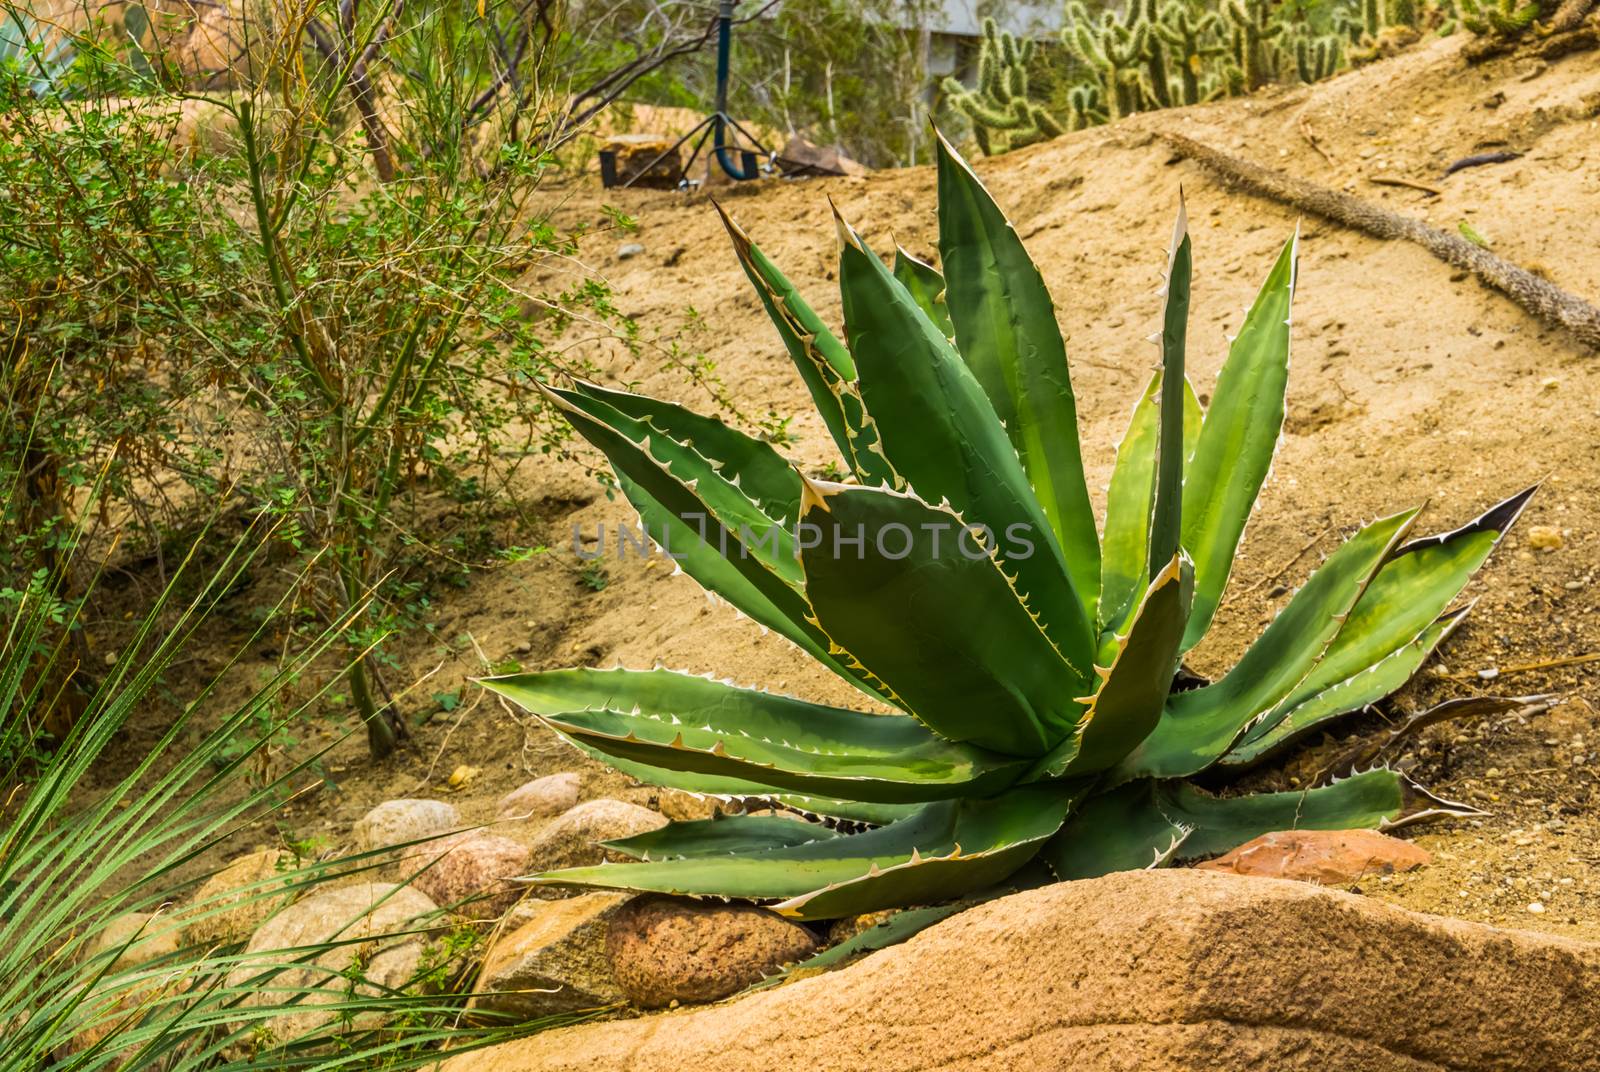 green sentry plant in a desert scenery, popular tropical plant specie from America